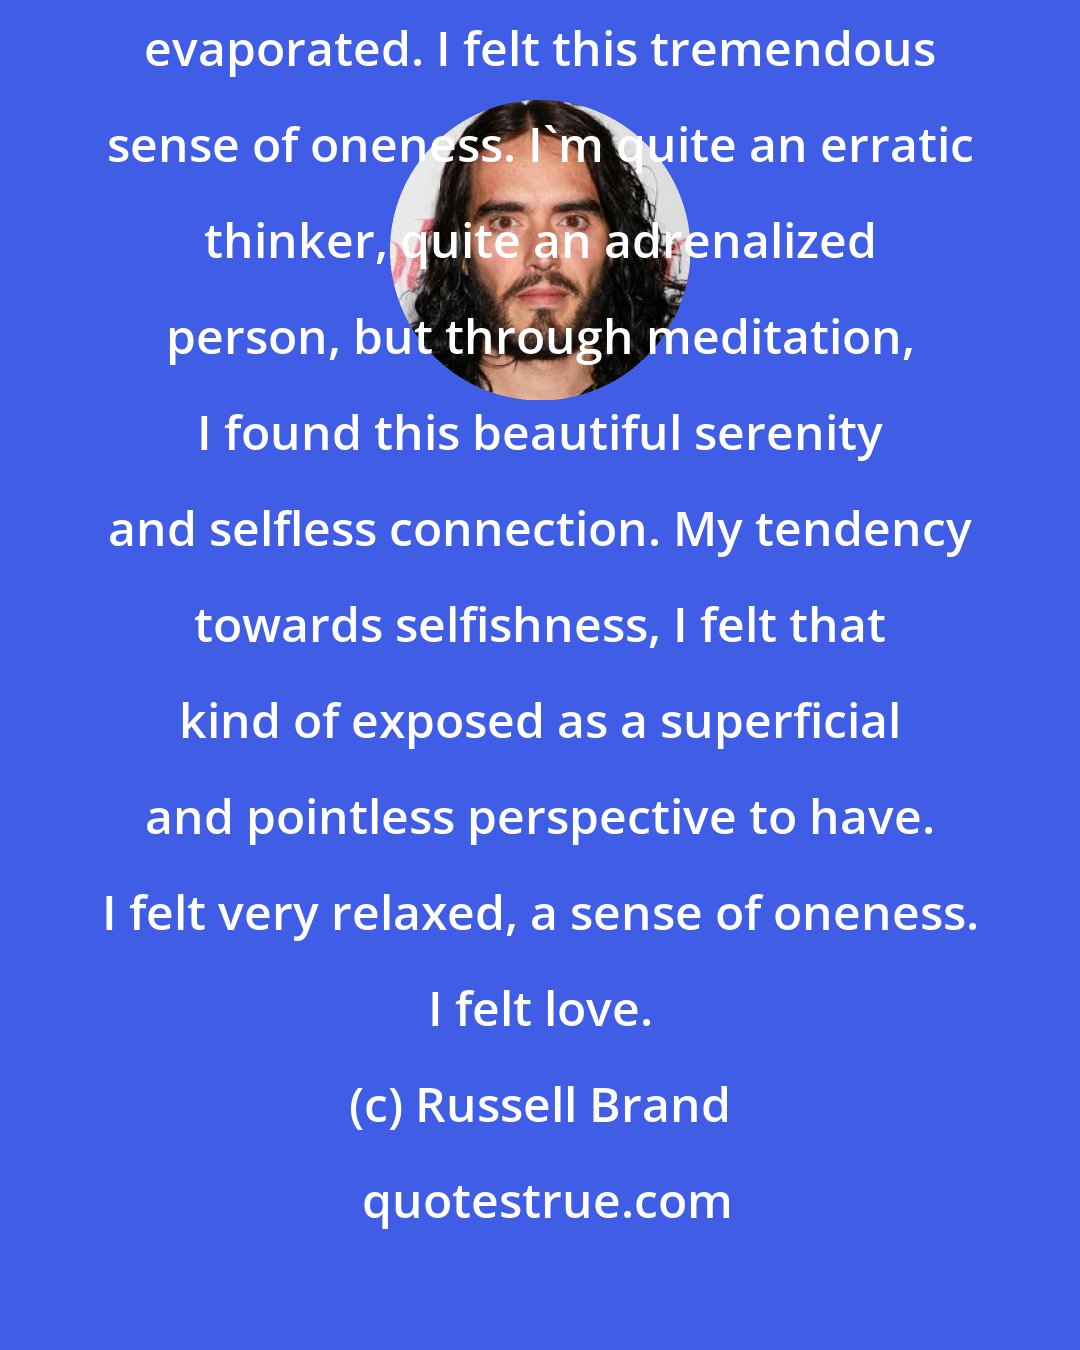 Russell Brand: What it felt to me was like the dissolution of my idea of myself. I felt like separateness evaporated. I felt this tremendous sense of oneness. I'm quite an erratic thinker, quite an adrenalized person, but through meditation, I found this beautiful serenity and selfless connection. My tendency towards selfishness, I felt that kind of exposed as a superficial and pointless perspective to have. I felt very relaxed, a sense of oneness. I felt love.